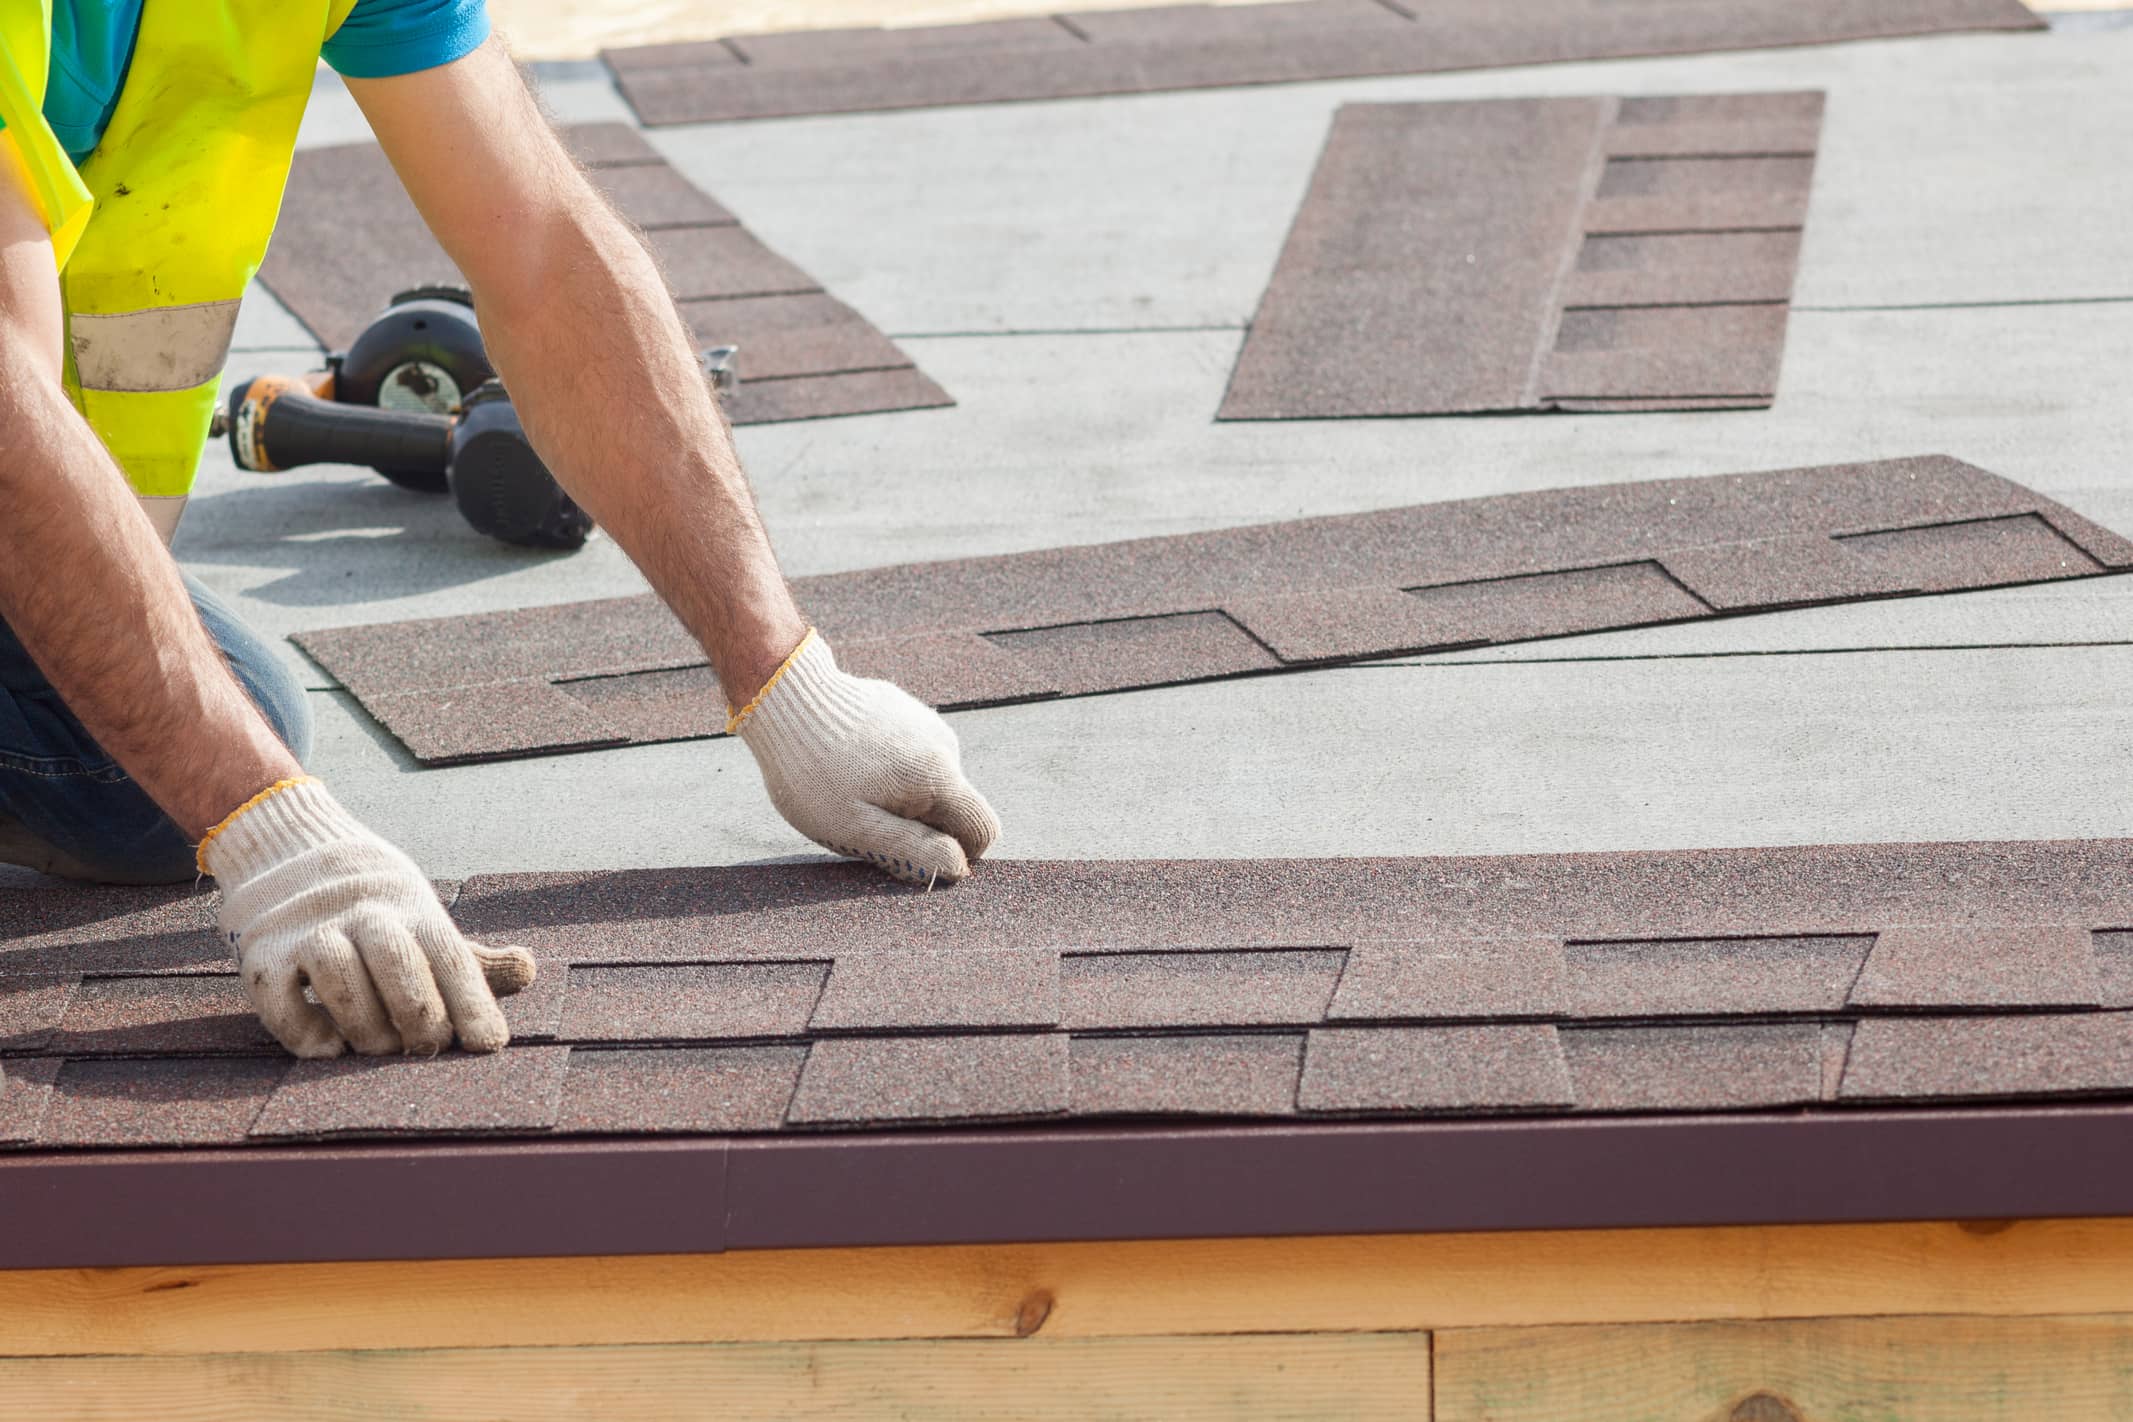 This is an image of a roofing contractor replacing roof shingles.